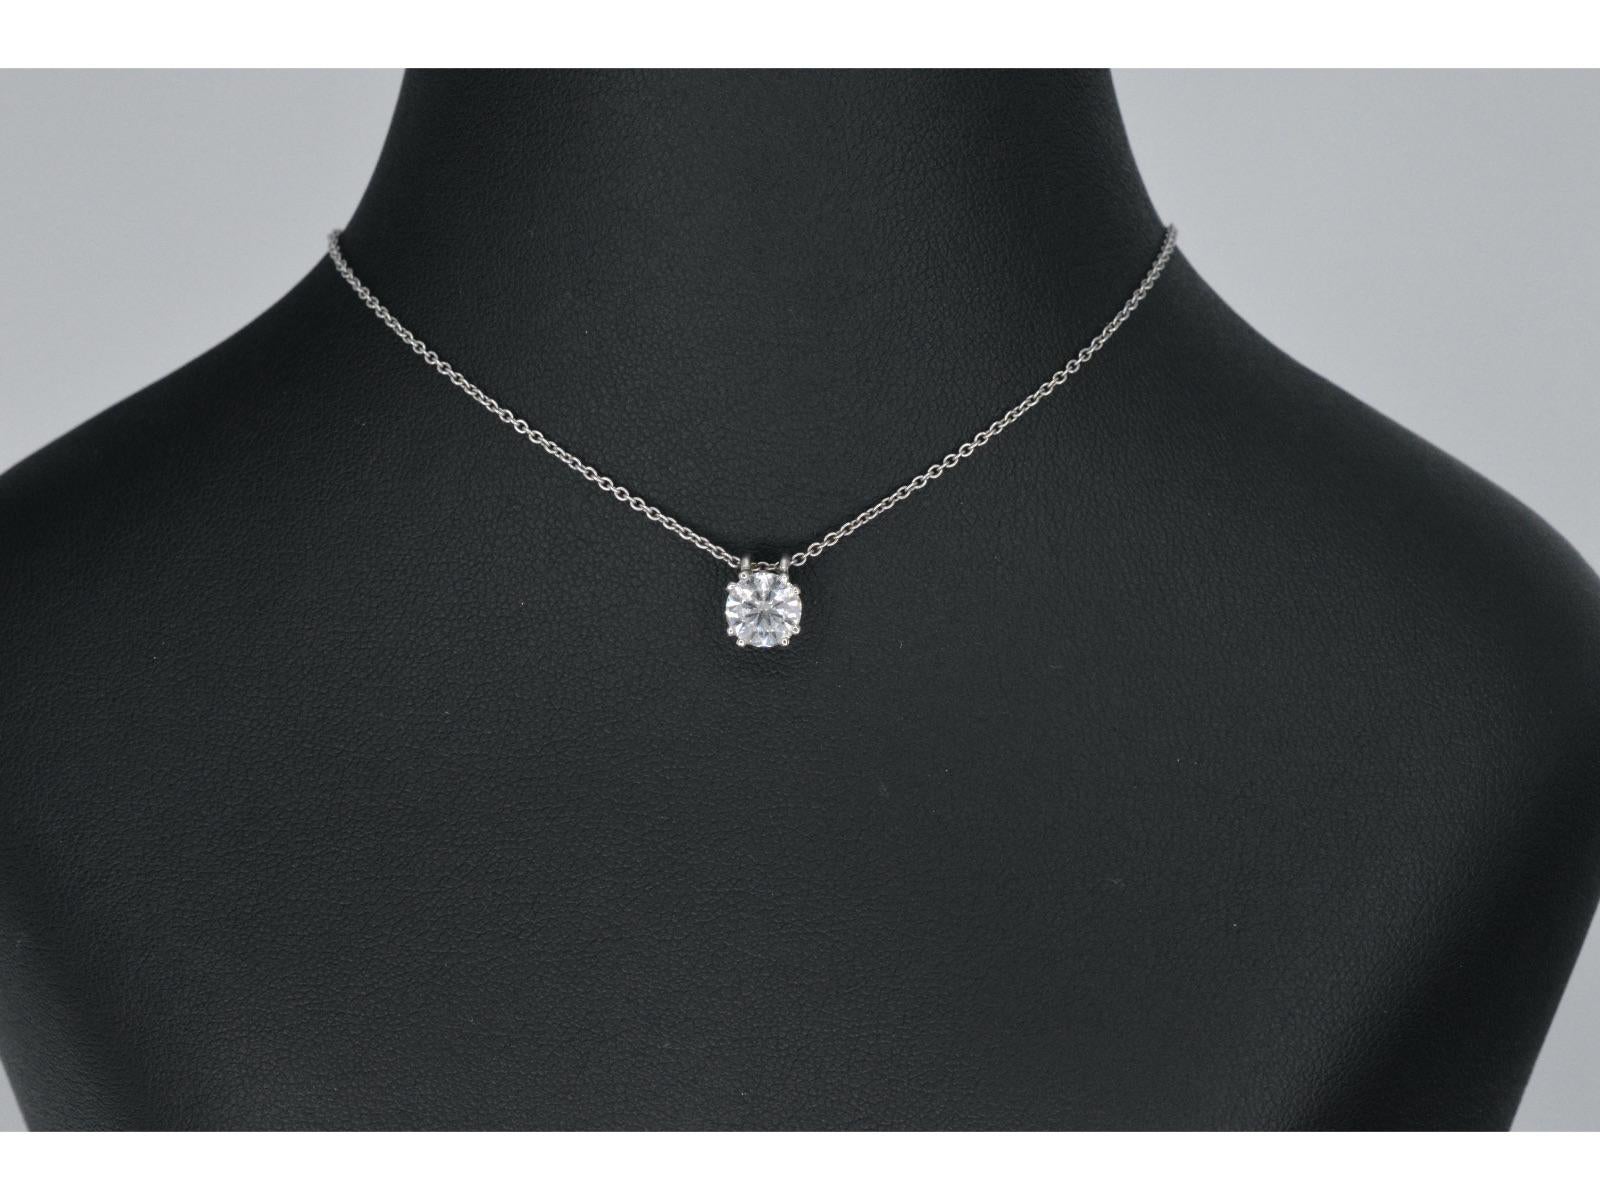 Elegant Gassan gold solitaire pendant graced with the timeless beauty of a single diamond. This exquisite pendant, from the renowned brand Gassan, showcases a single Gassan 121 cut diamond with a weight of 1.00 carat. The diamond, with its